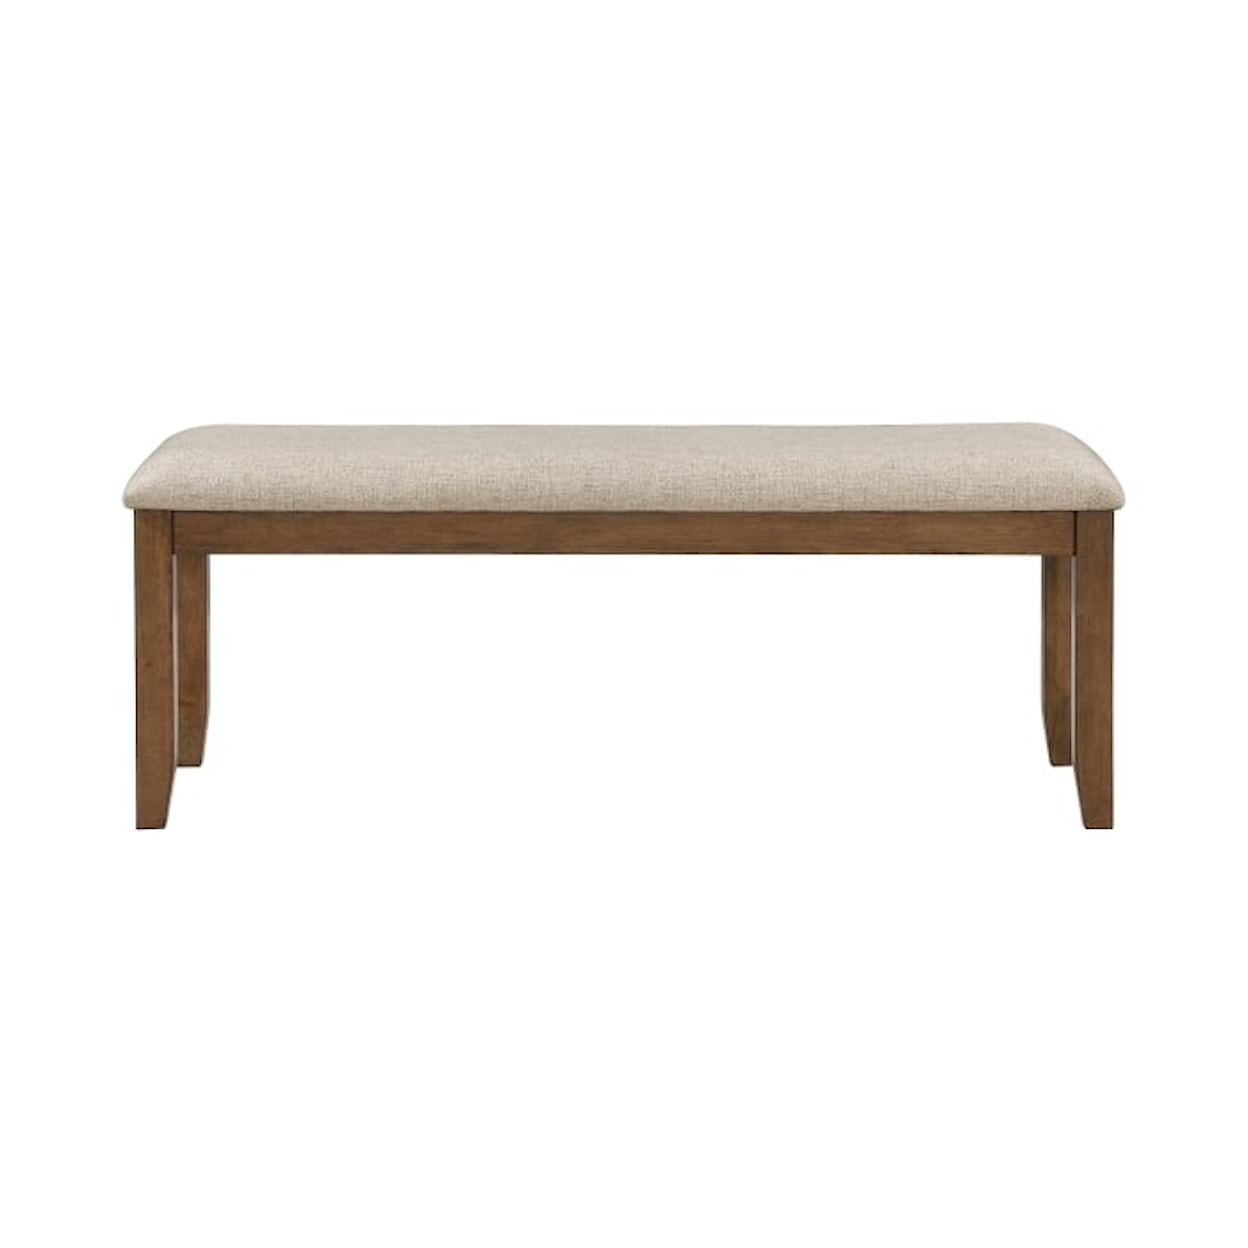 Homelegance Counsil Dining Bench